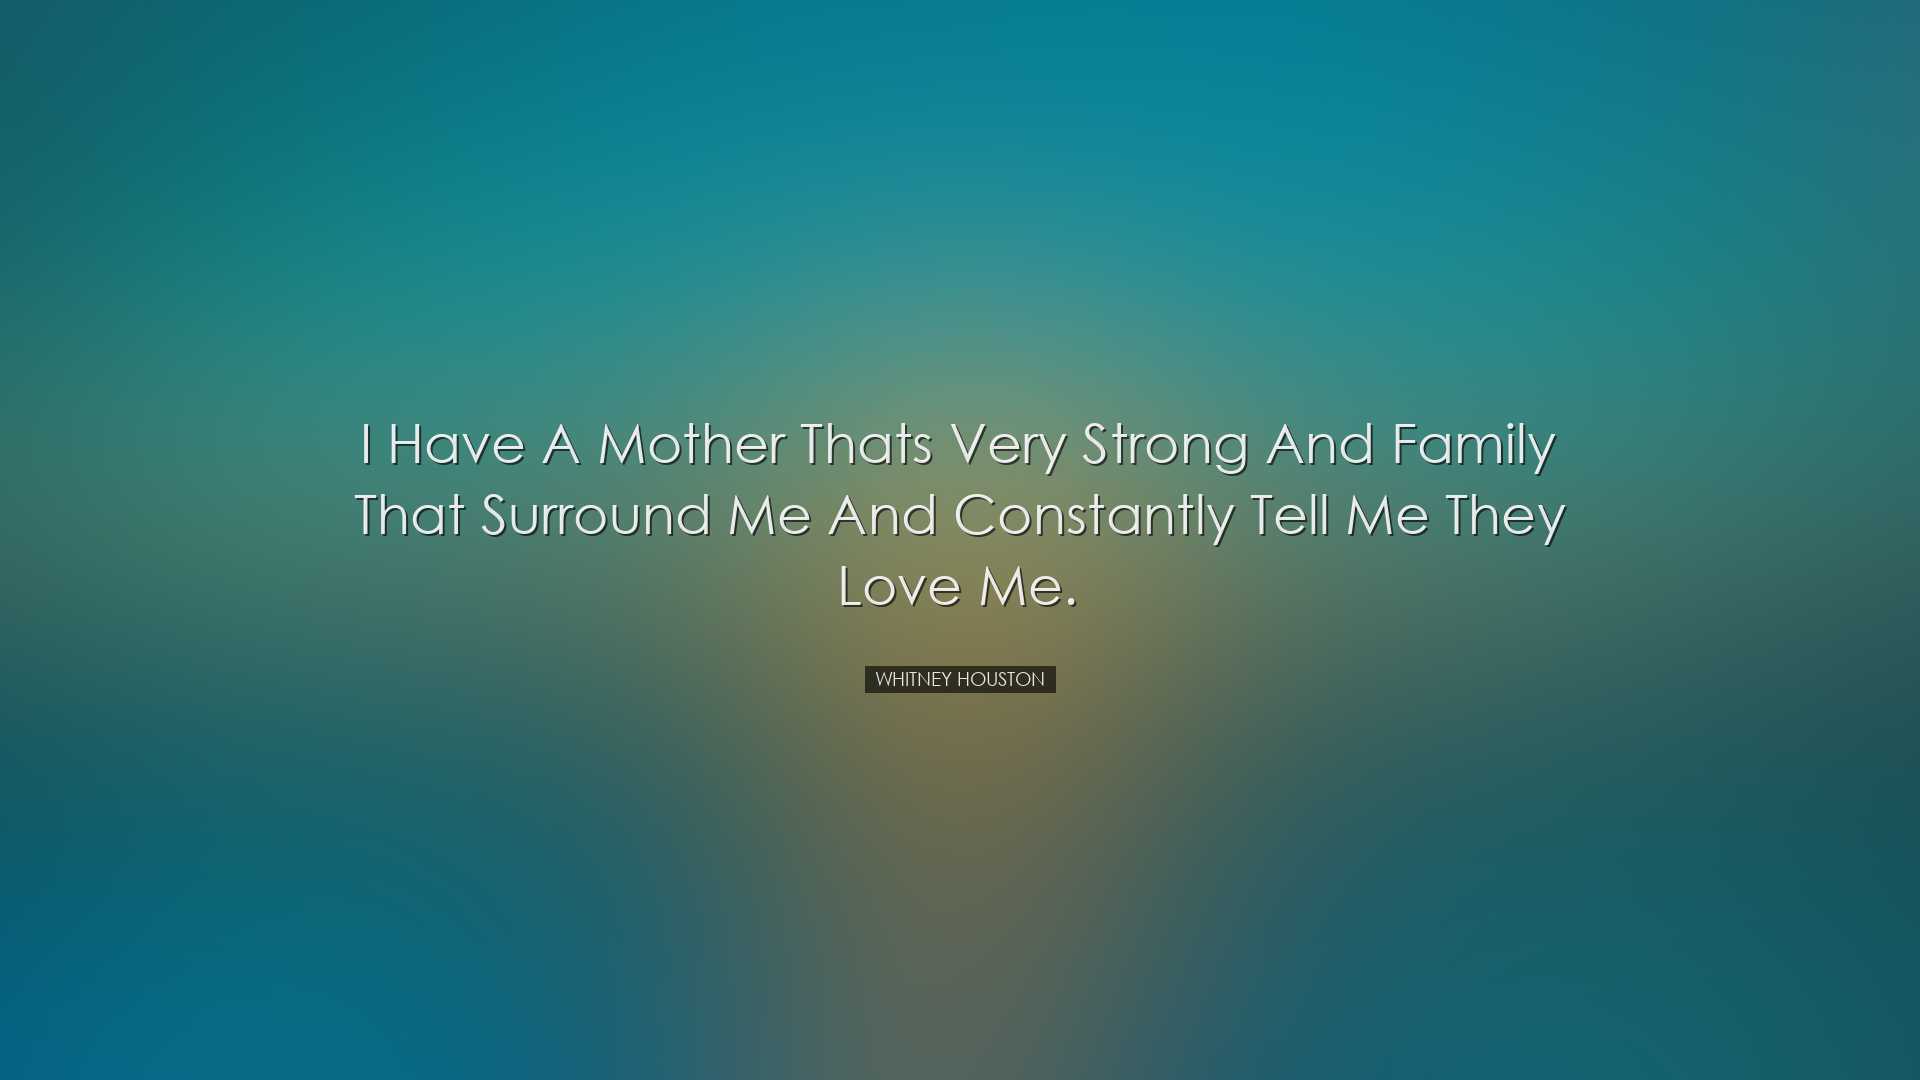 I have a mother thats very strong and family that surround me and